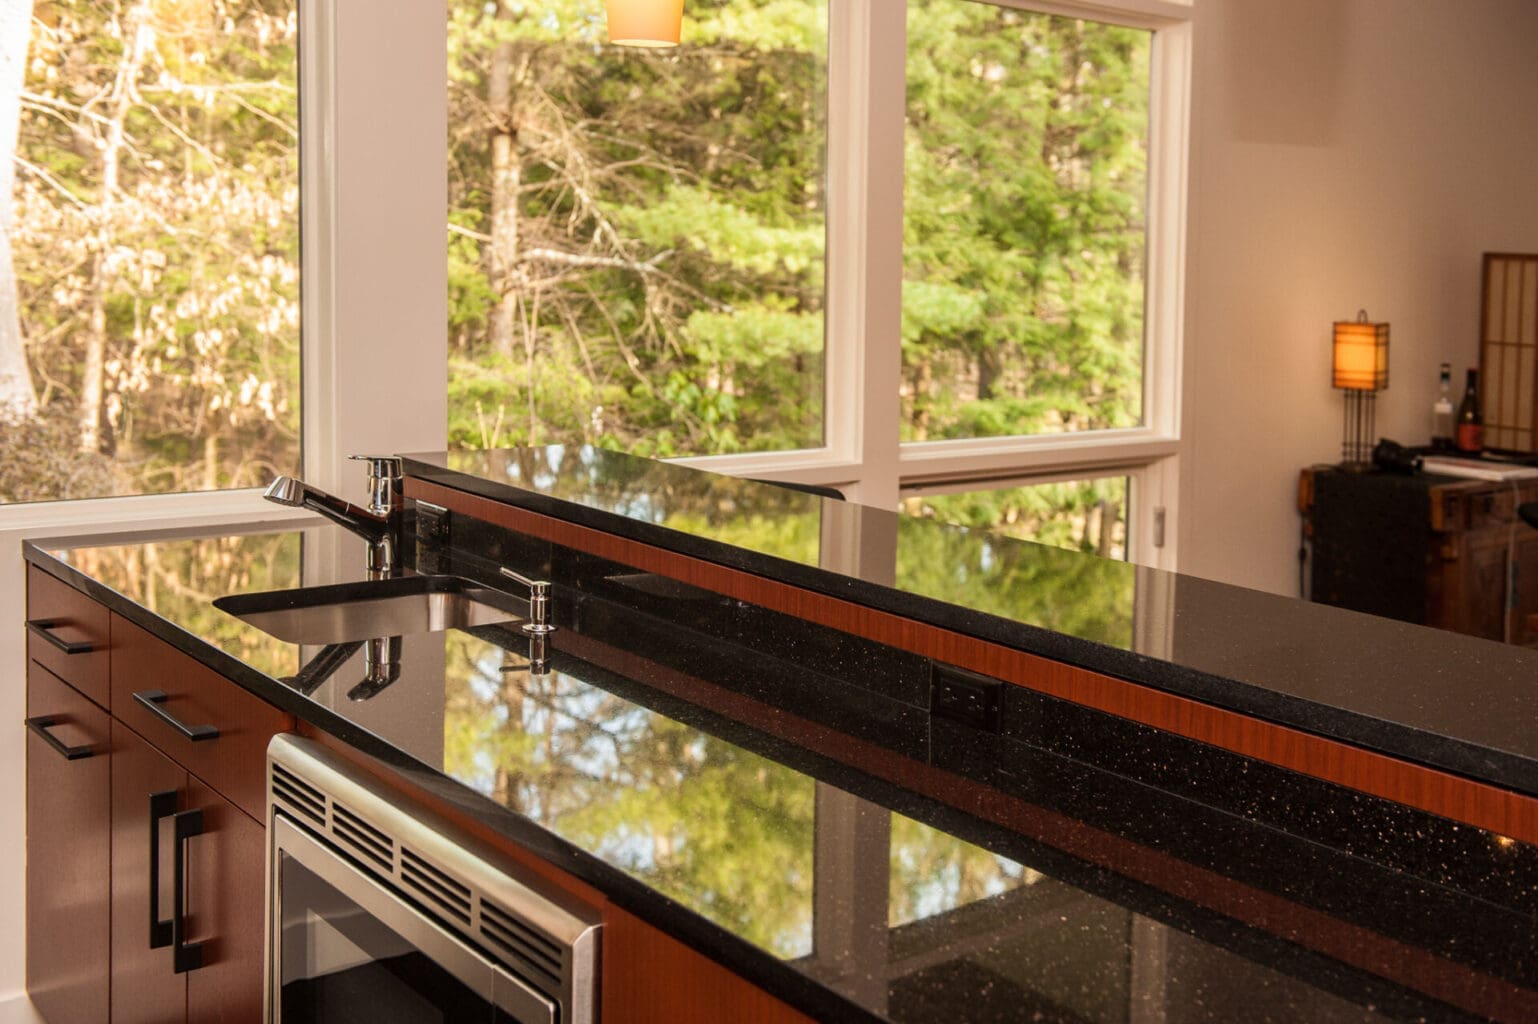 A photo of a mid-century modern kitchen island with black stone countertops, stainless steel appliances, black hardware, and floor-to-ceiling windows.